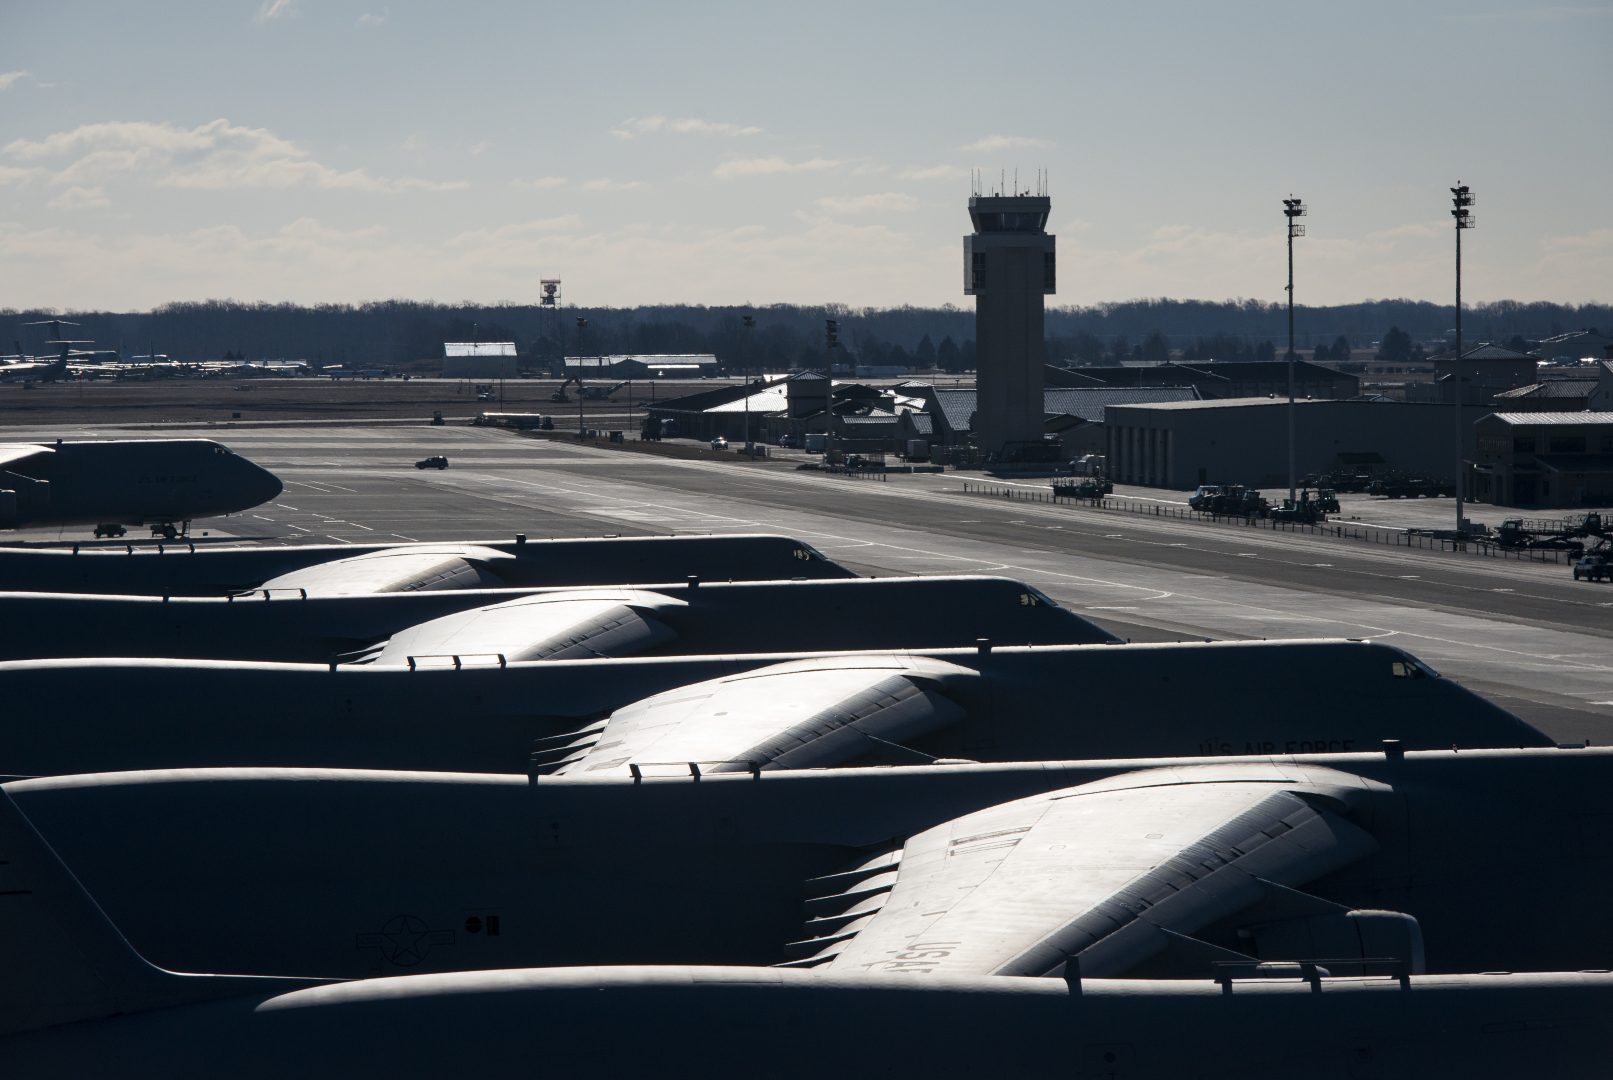 Several C-5 Galaxies sit on the flightline during the morning sunrise at Dover Air Force Base, Delaware, home to the 436th Airlift Wing. Photo used under creative commons license (https://bit.ly/1jNlqZo).